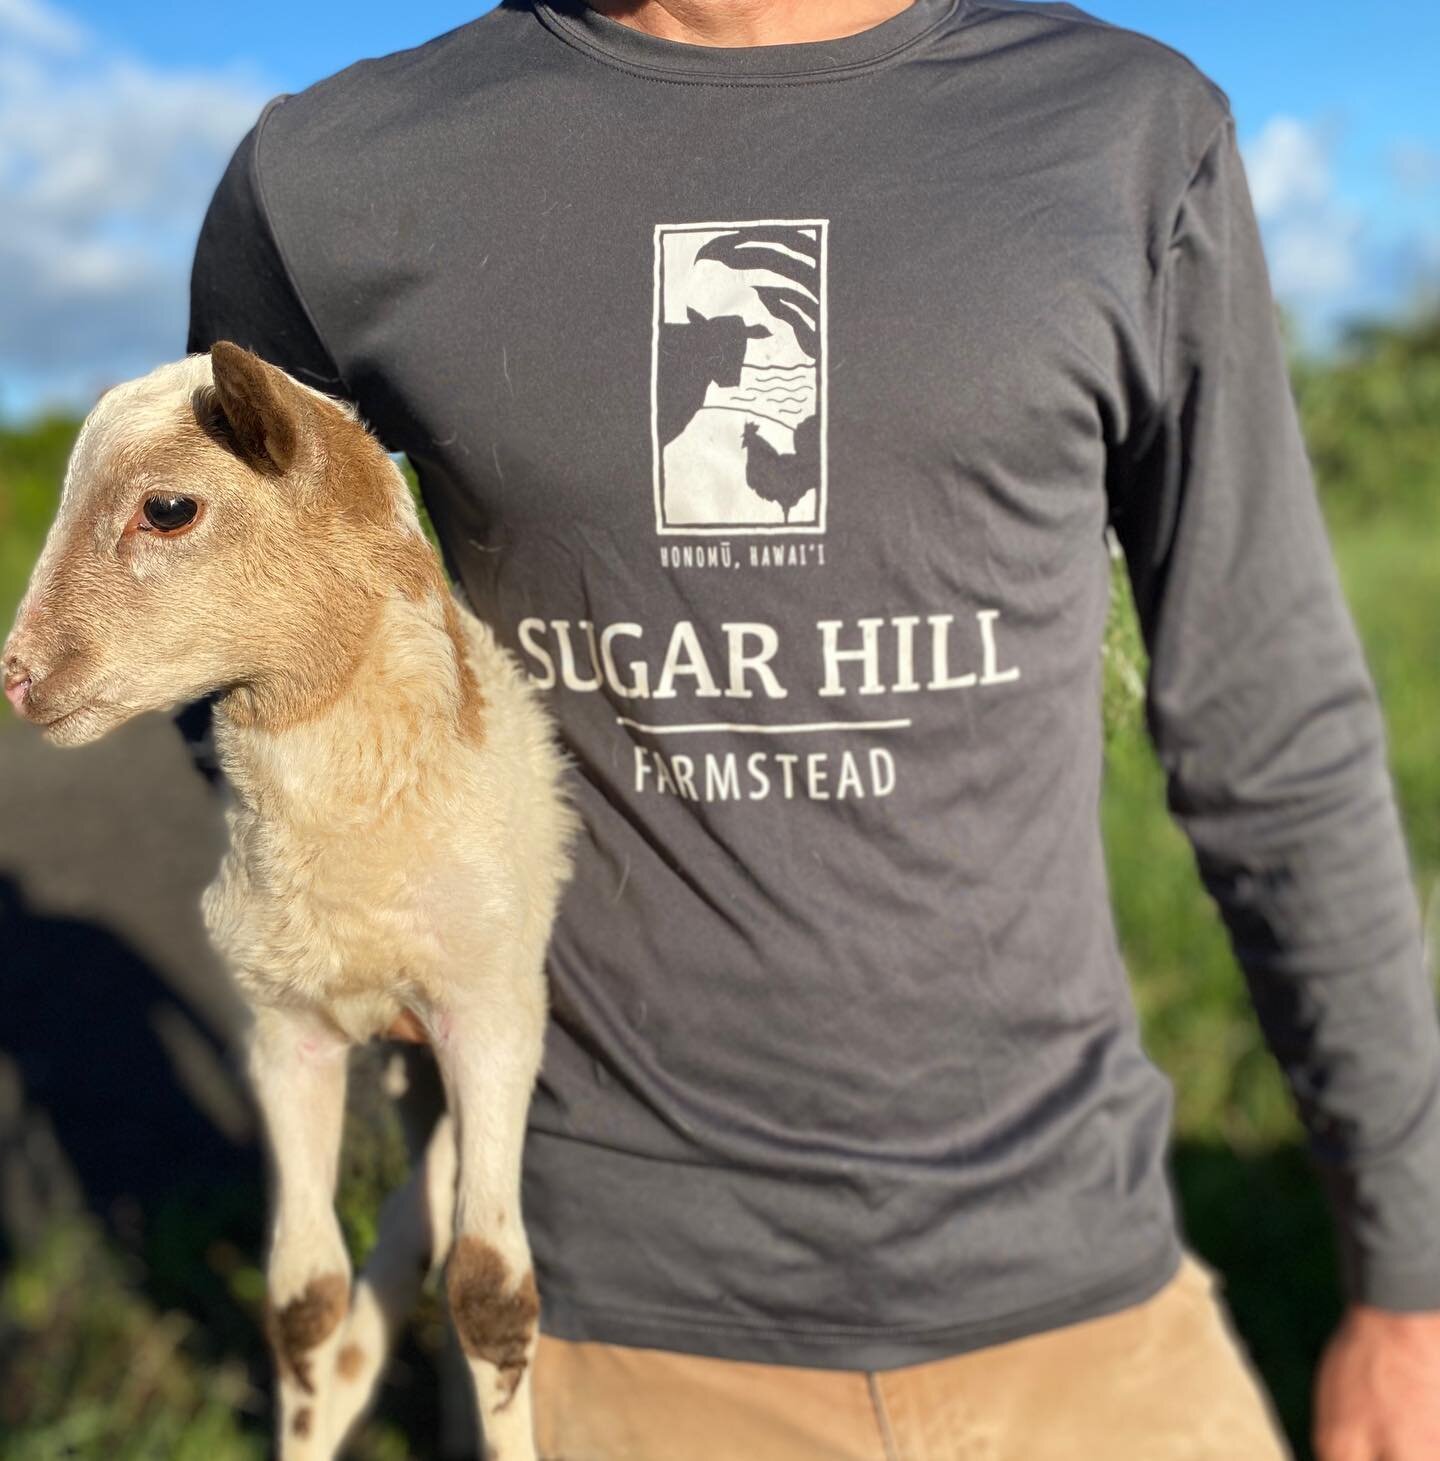 New product alert!

Lightweight performance long sleeve t-shirts have dropped on the farm shop for #cybermonday

Lamb not included 🤣

#regenerativeagriculture #hawaii #farmlife #giftideas #shopsmallbusiness #hilo #honomu #supportlocalfarmers #lambch